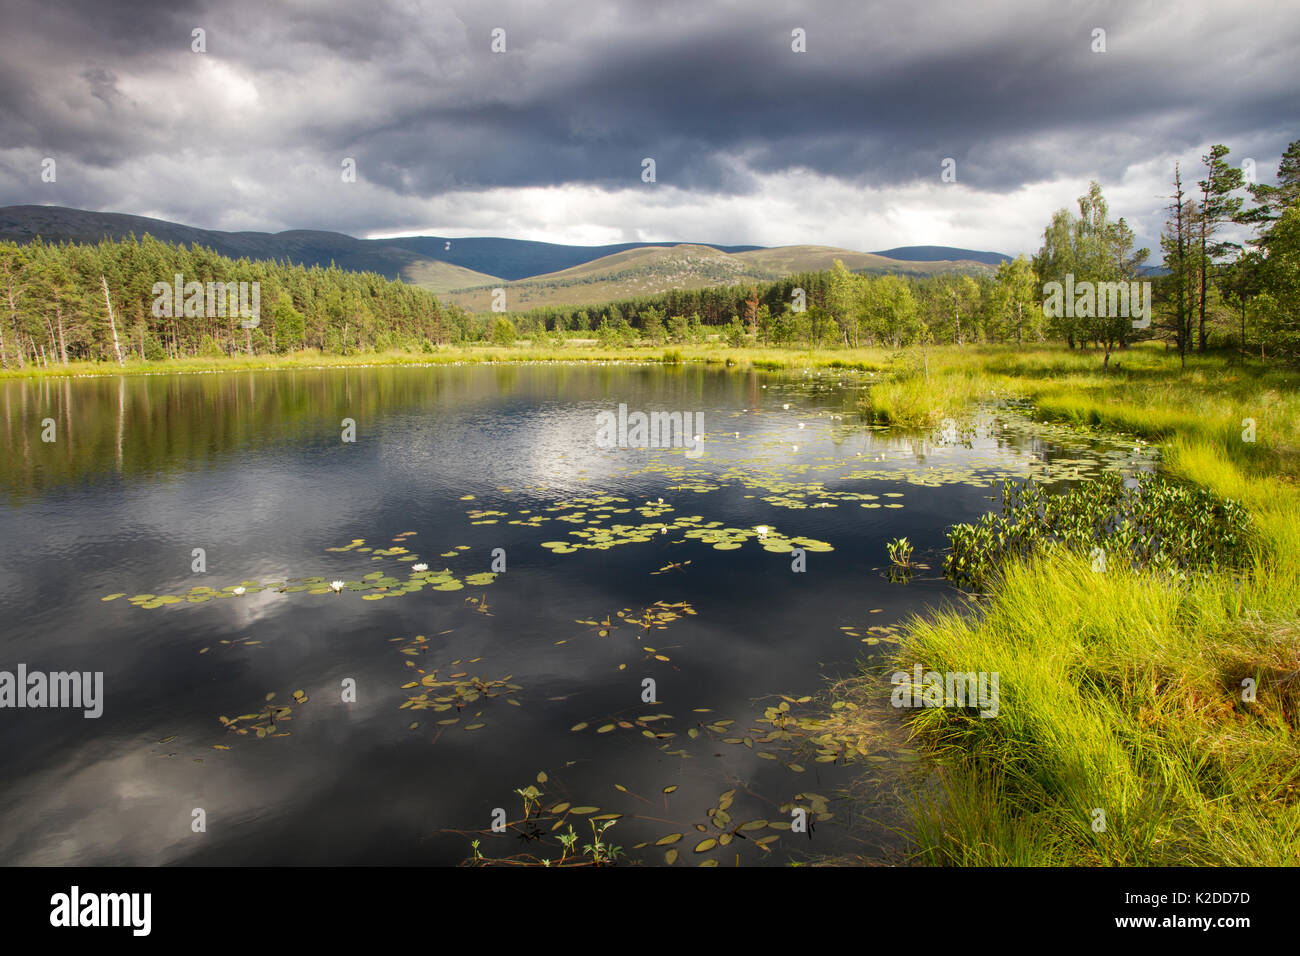 Uath Lochan with stormy skies reflected in water, Cairngorms National Park, Scotland, UK, July 2014. Stock Photo